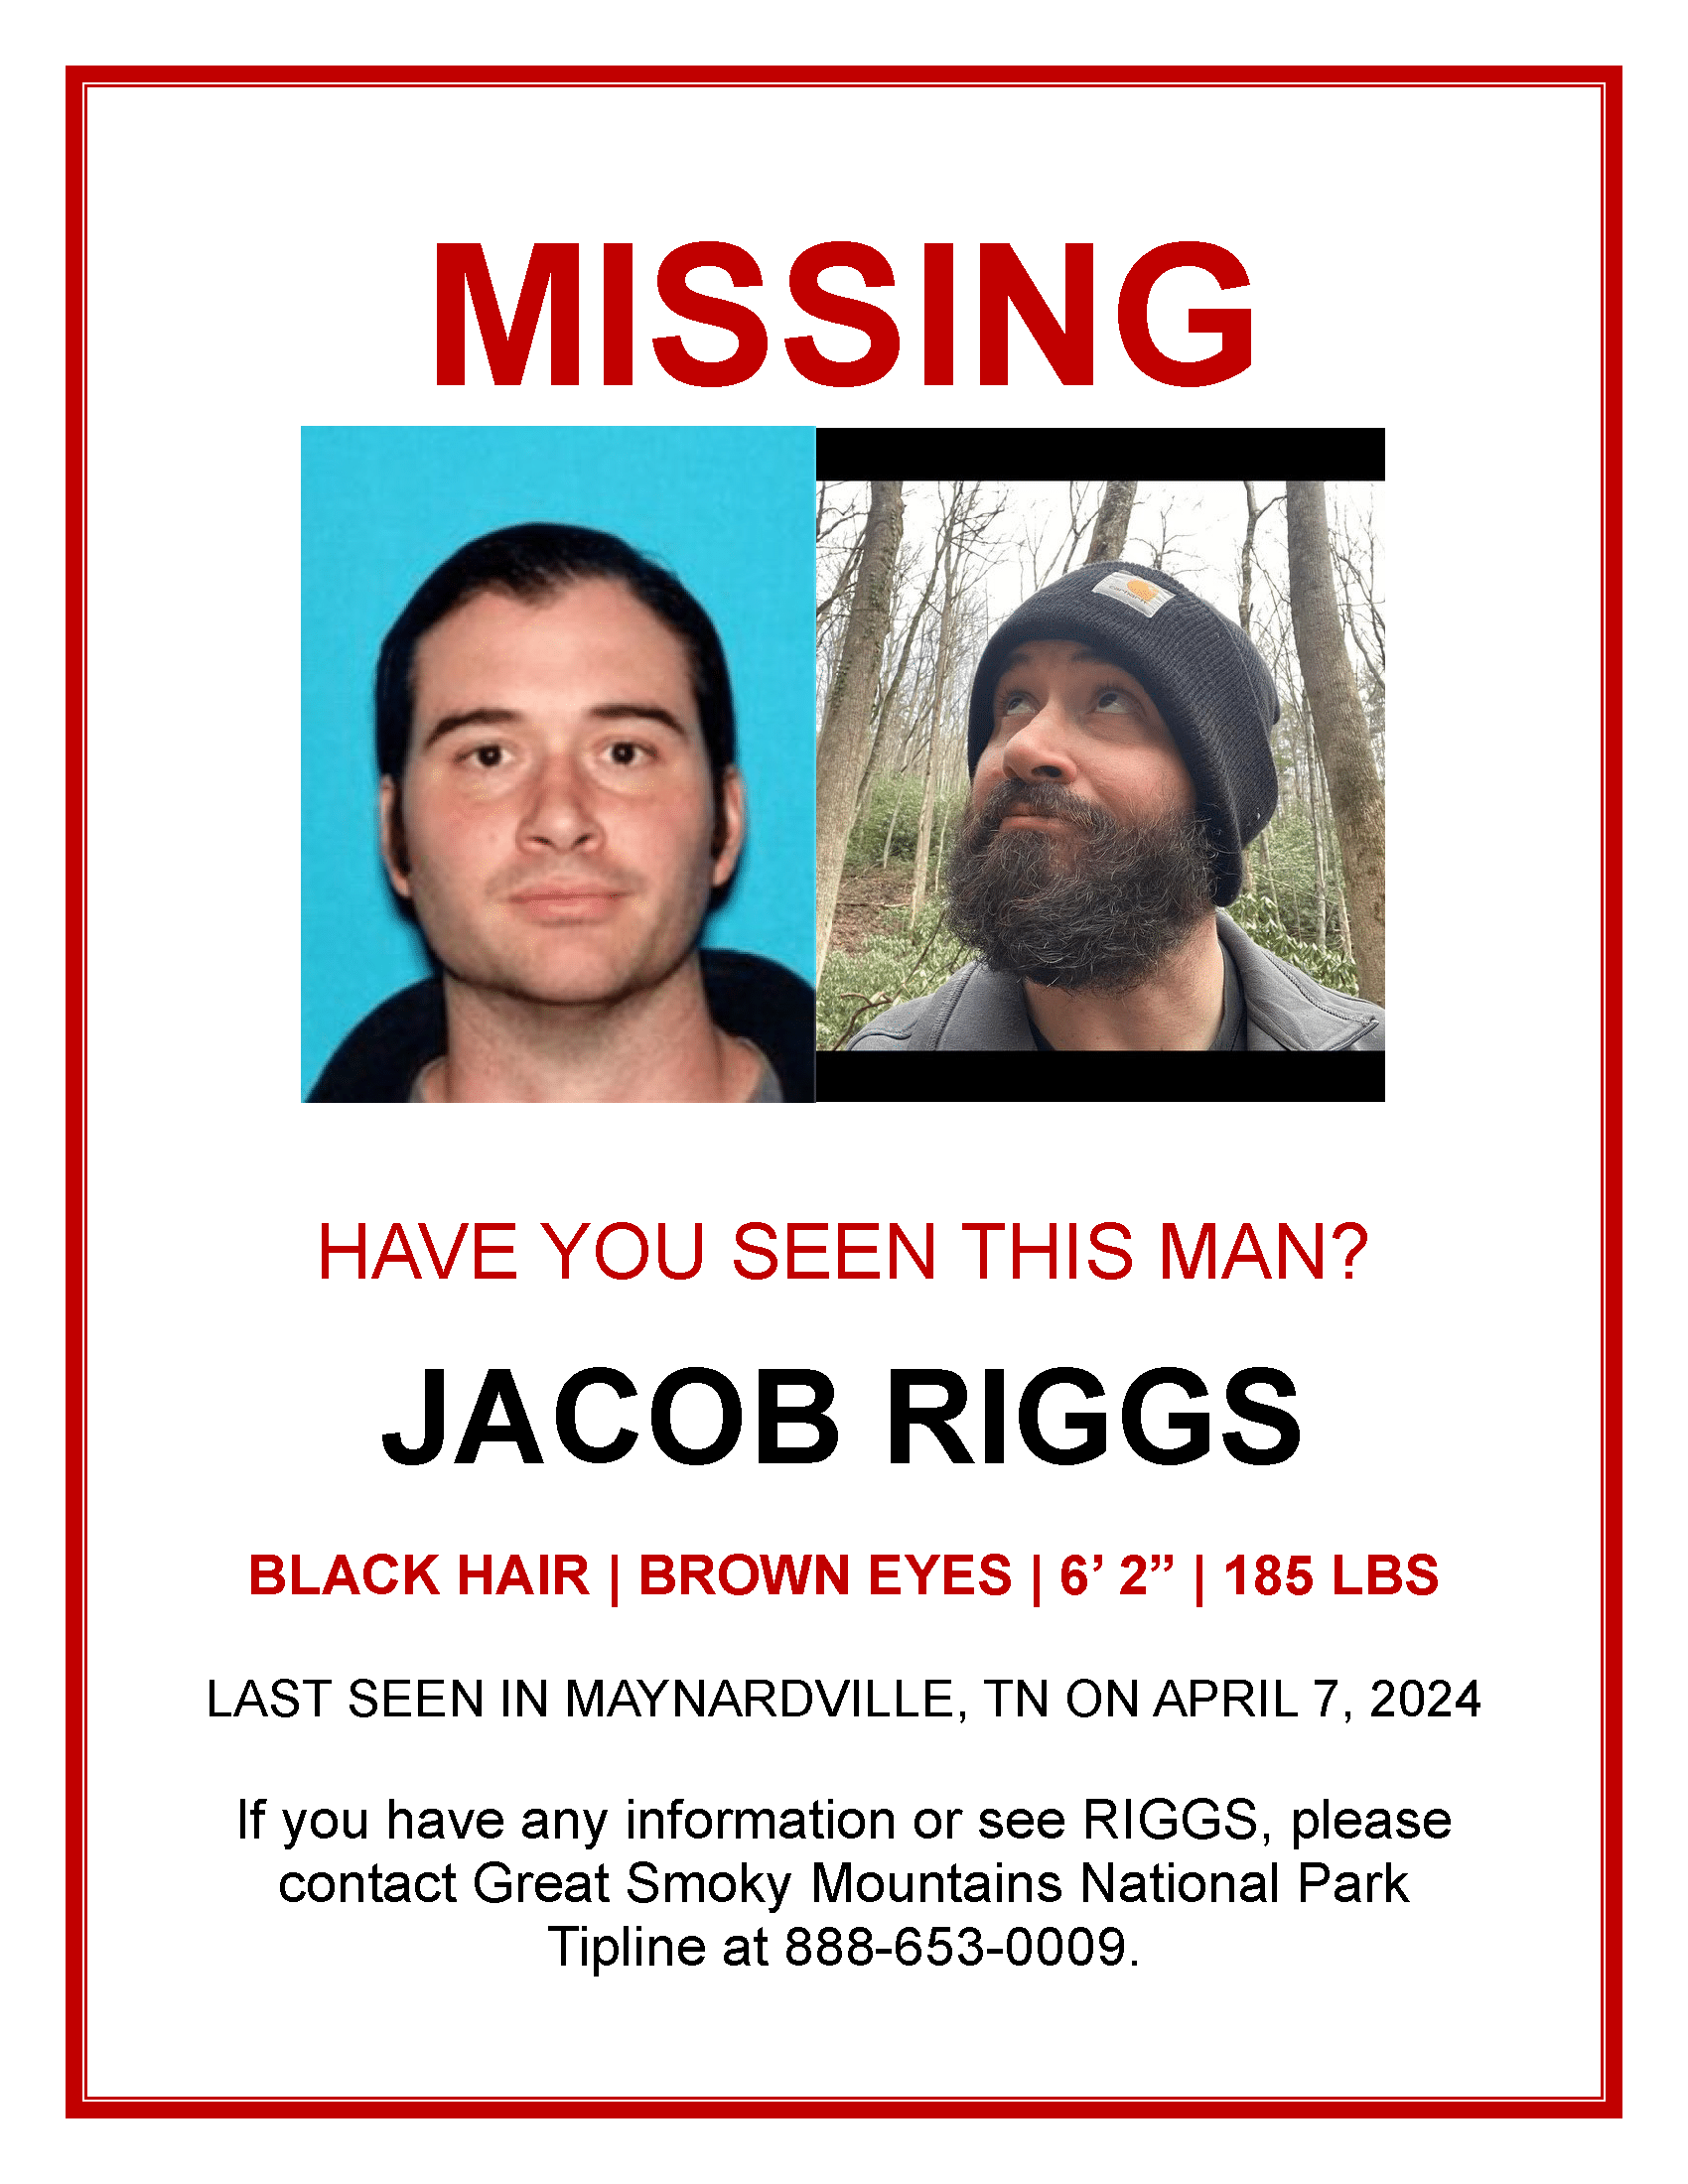 Jacob Riggs missing person flyer.